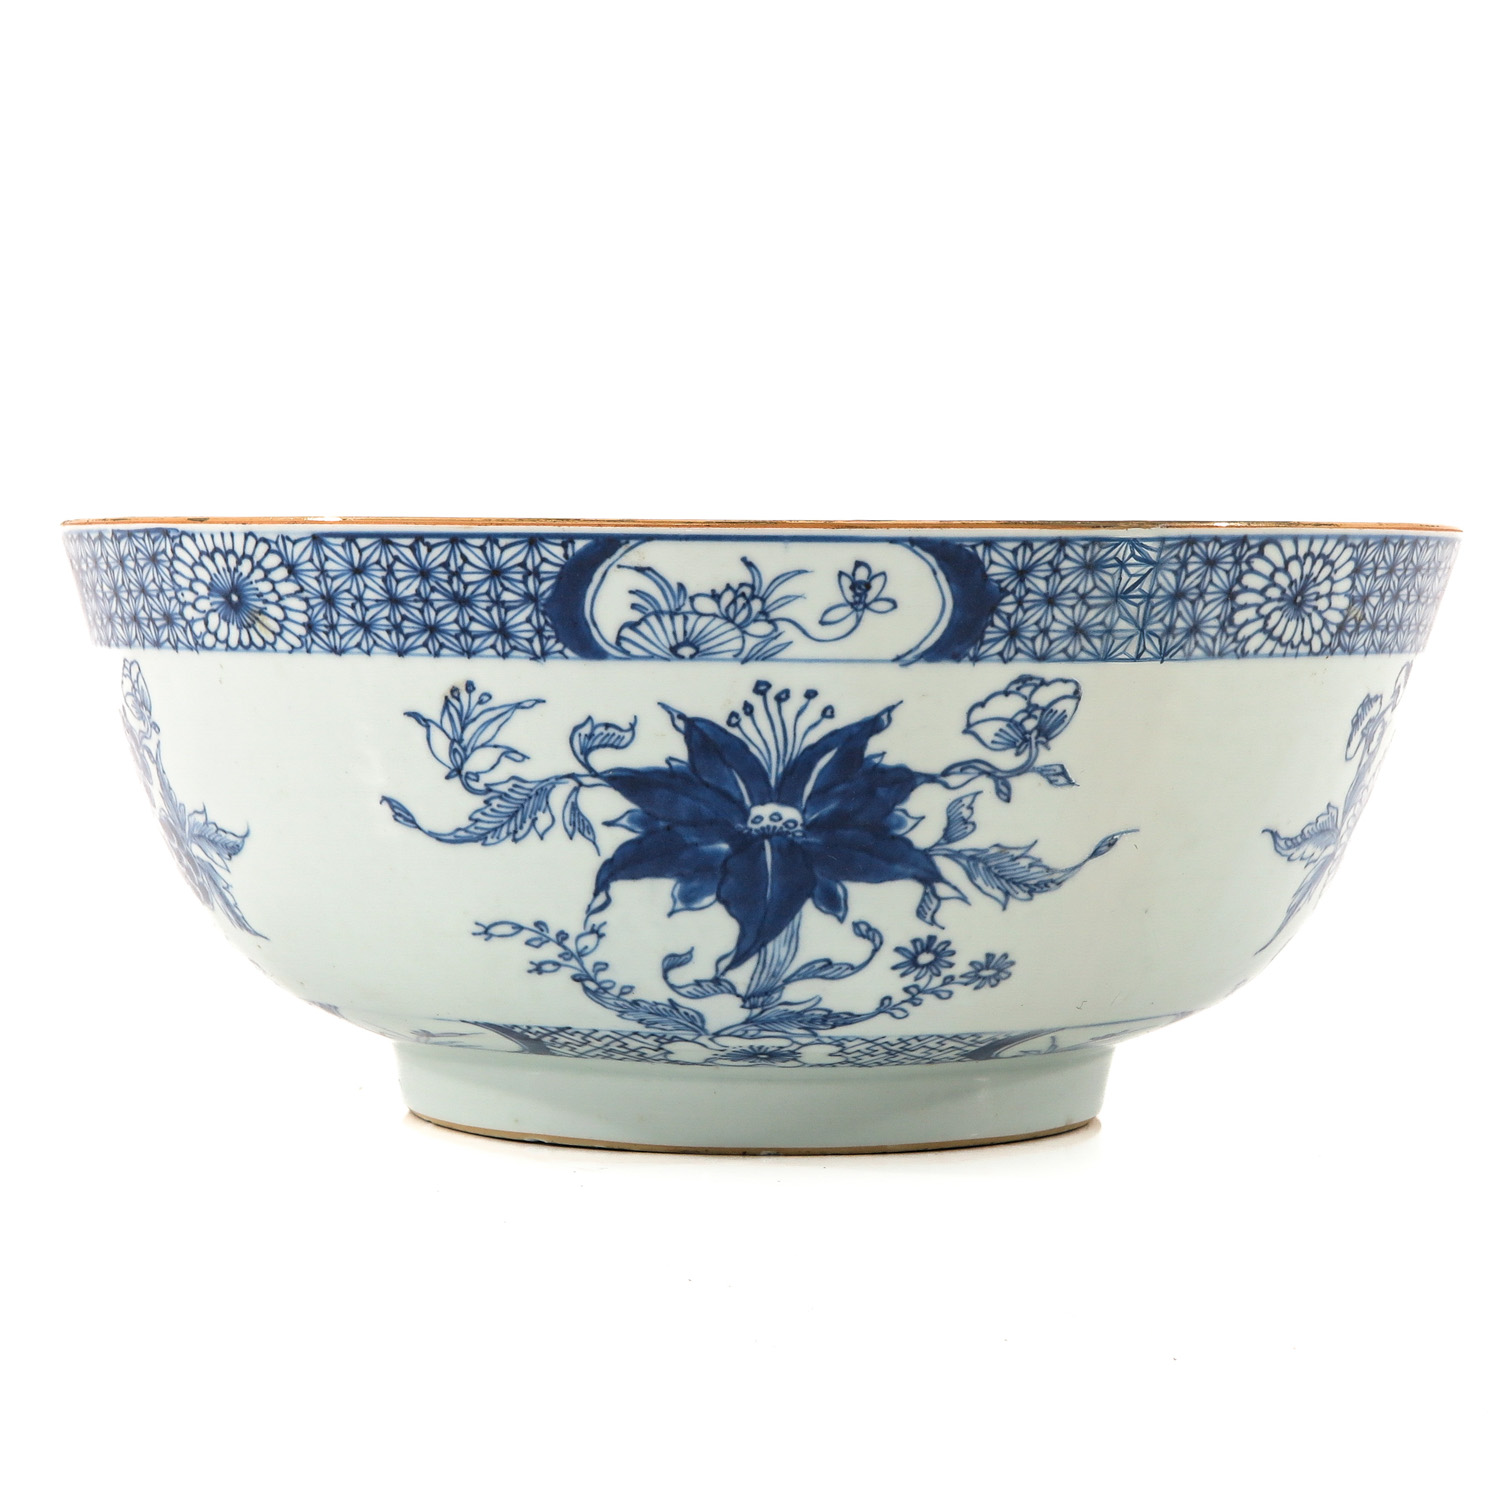 A Large Blue and White Serving Bowl - Image 4 of 9